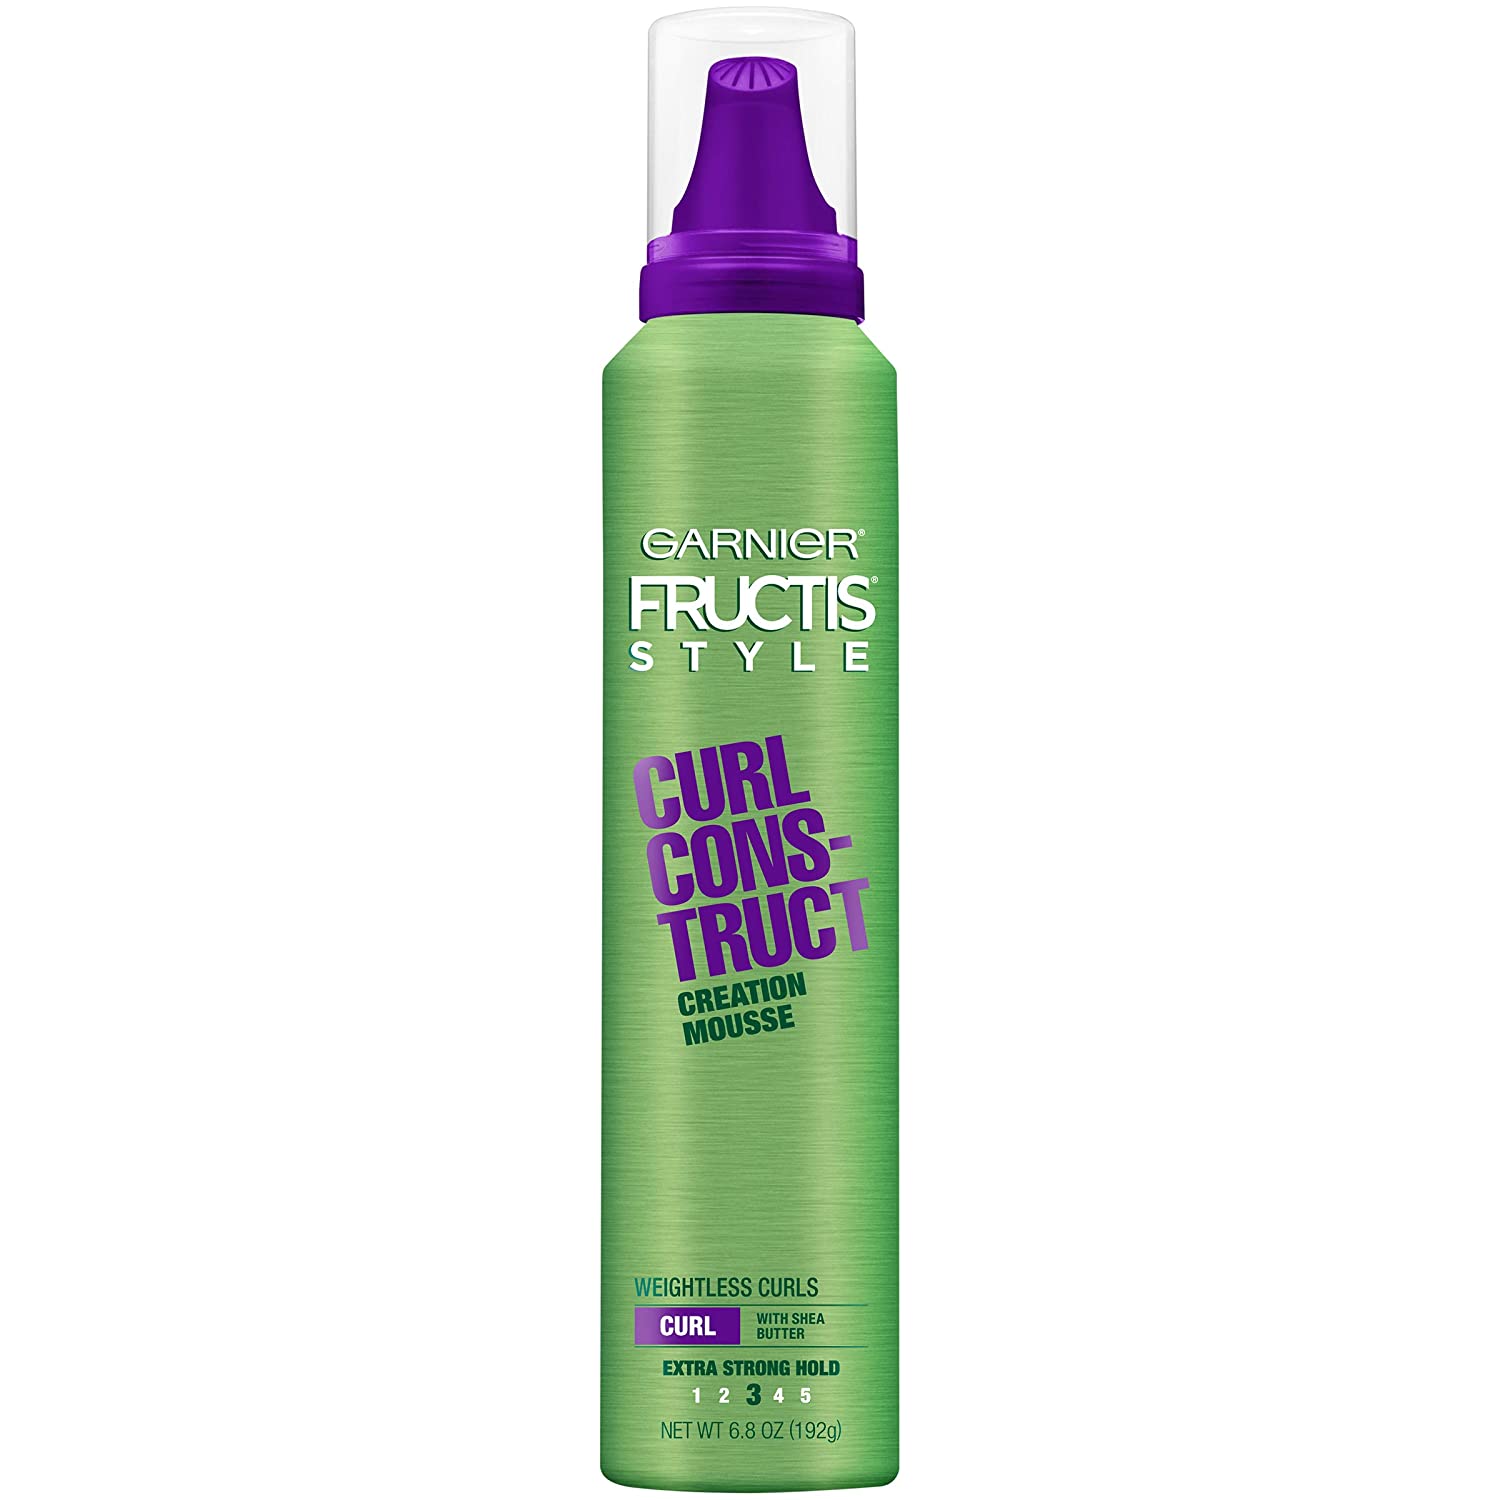 Bình mousse giữ nếp tóc Garnier Fructis Style Curl Construct Creation Mousse  Curly Hair 192g (Mỹ) 